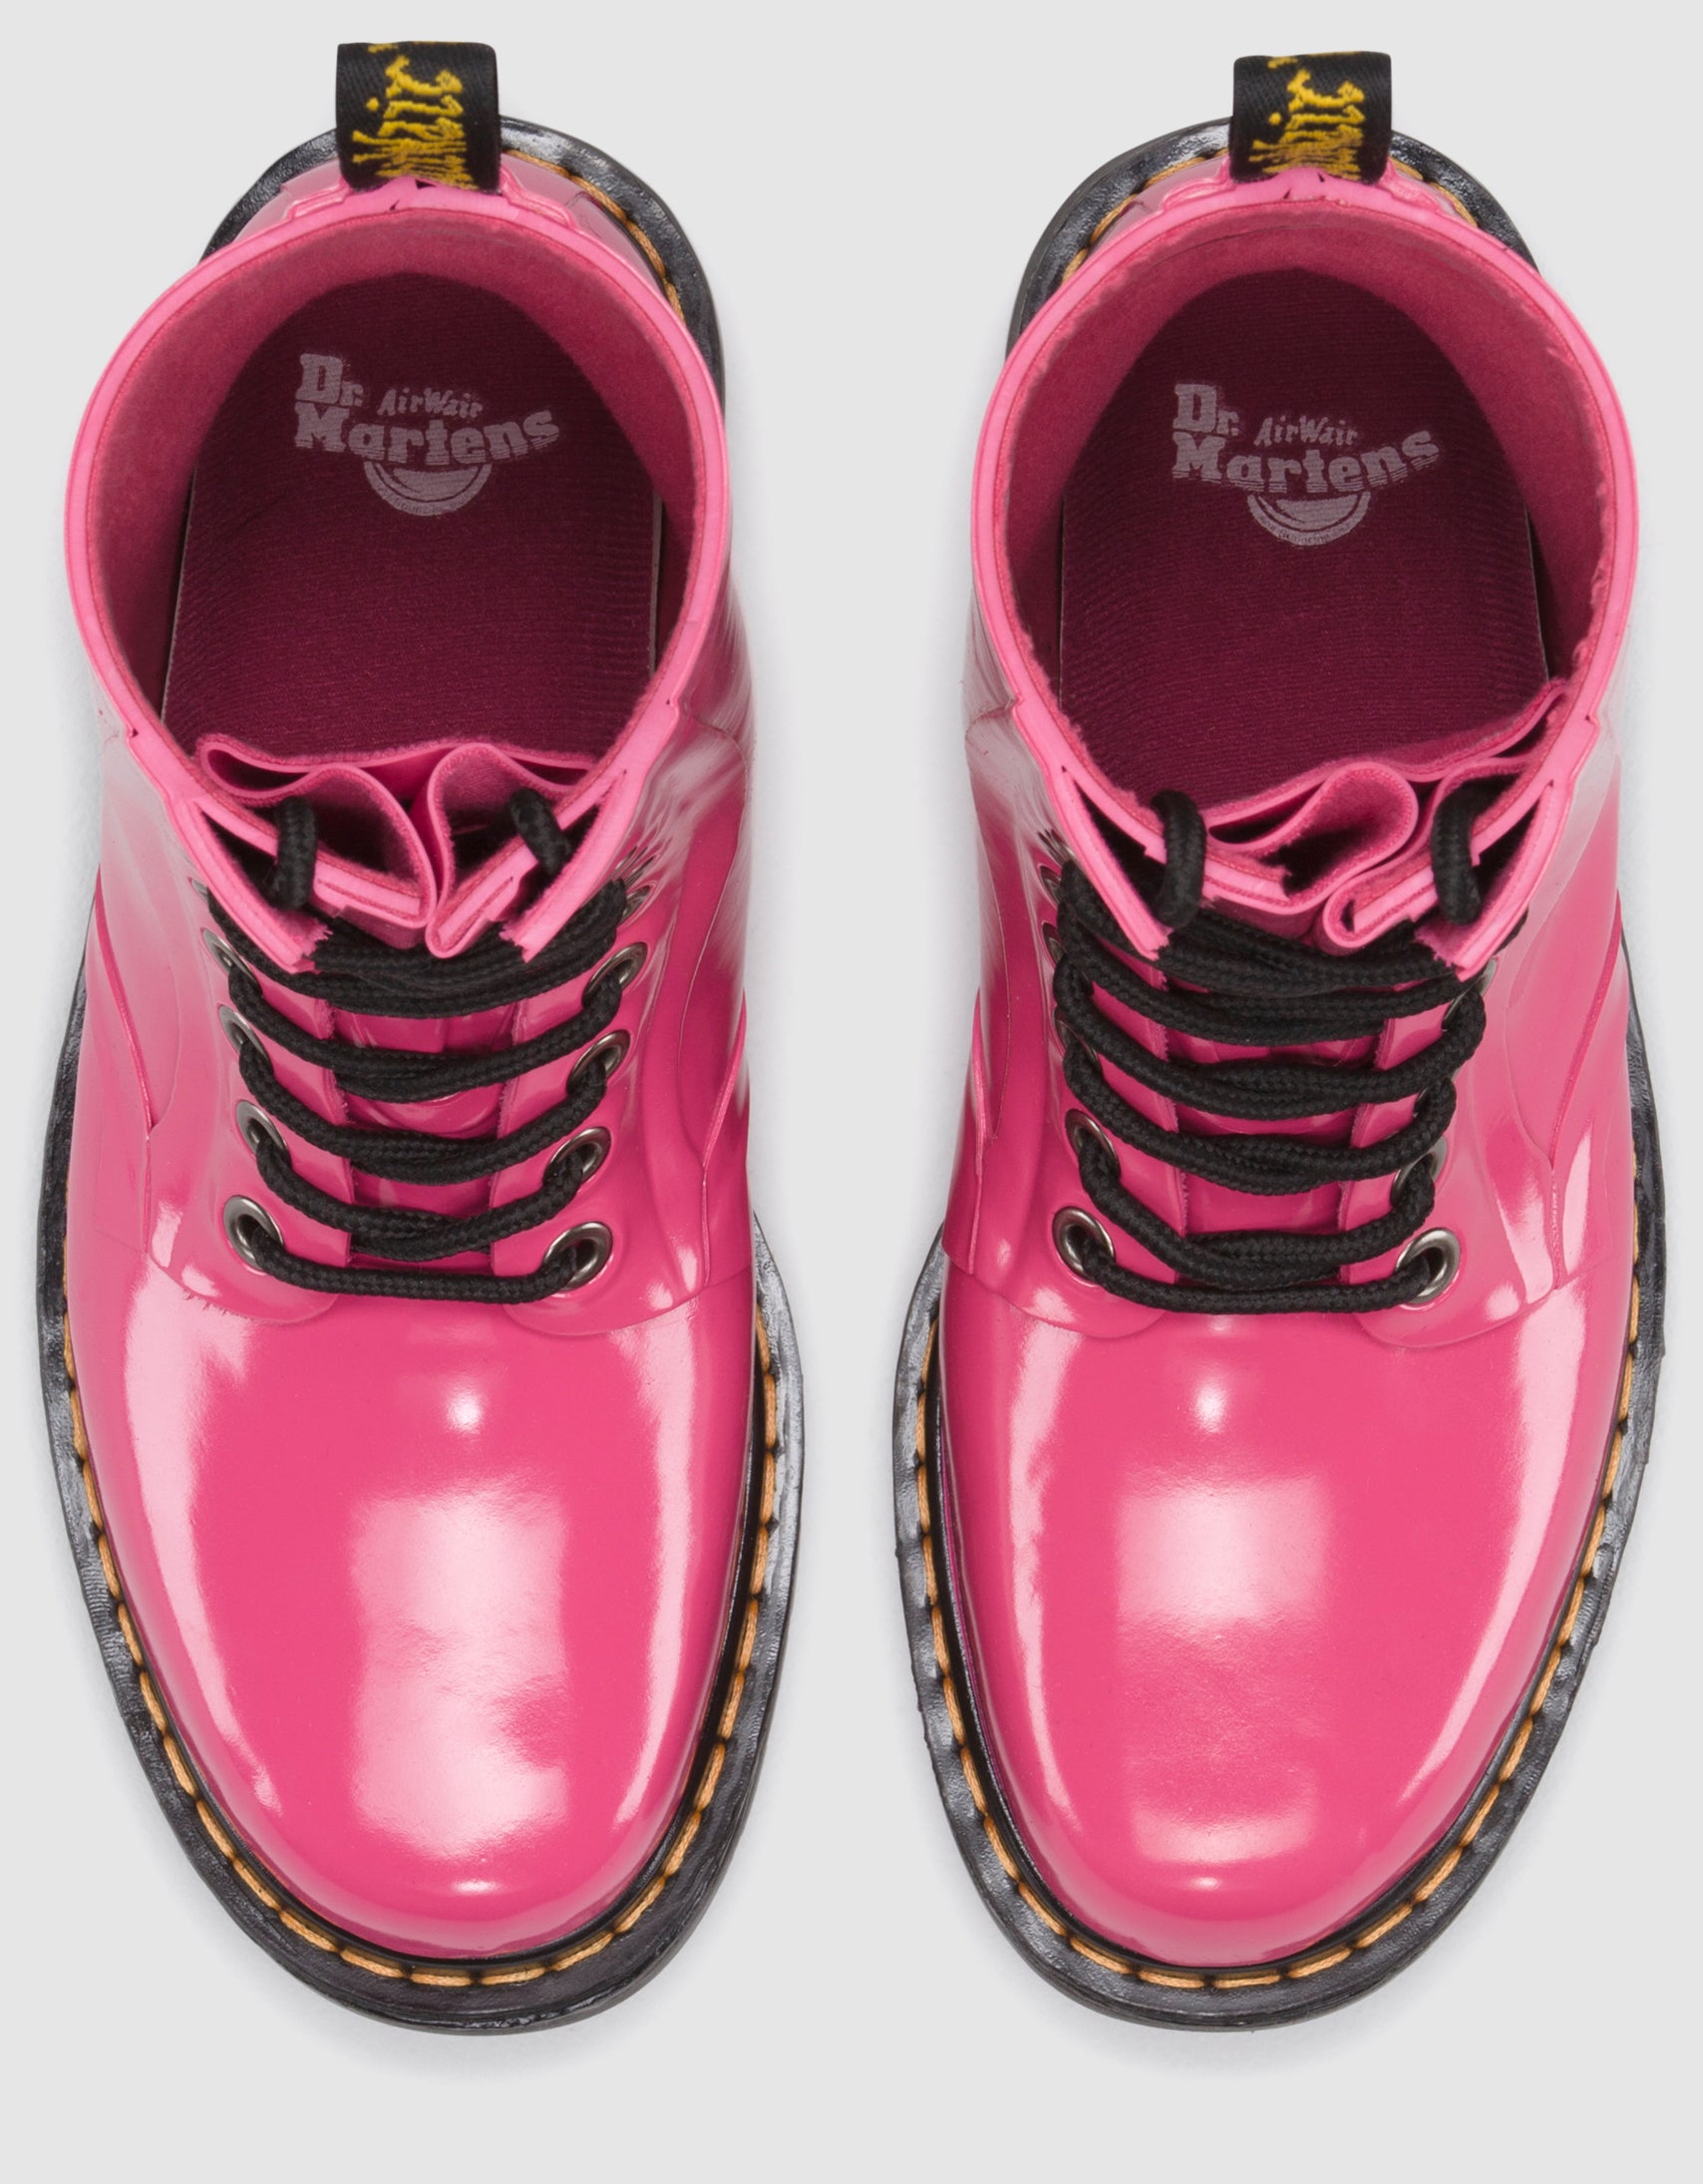 DRENCH HOT PINK PATENT RUBBER BOOT